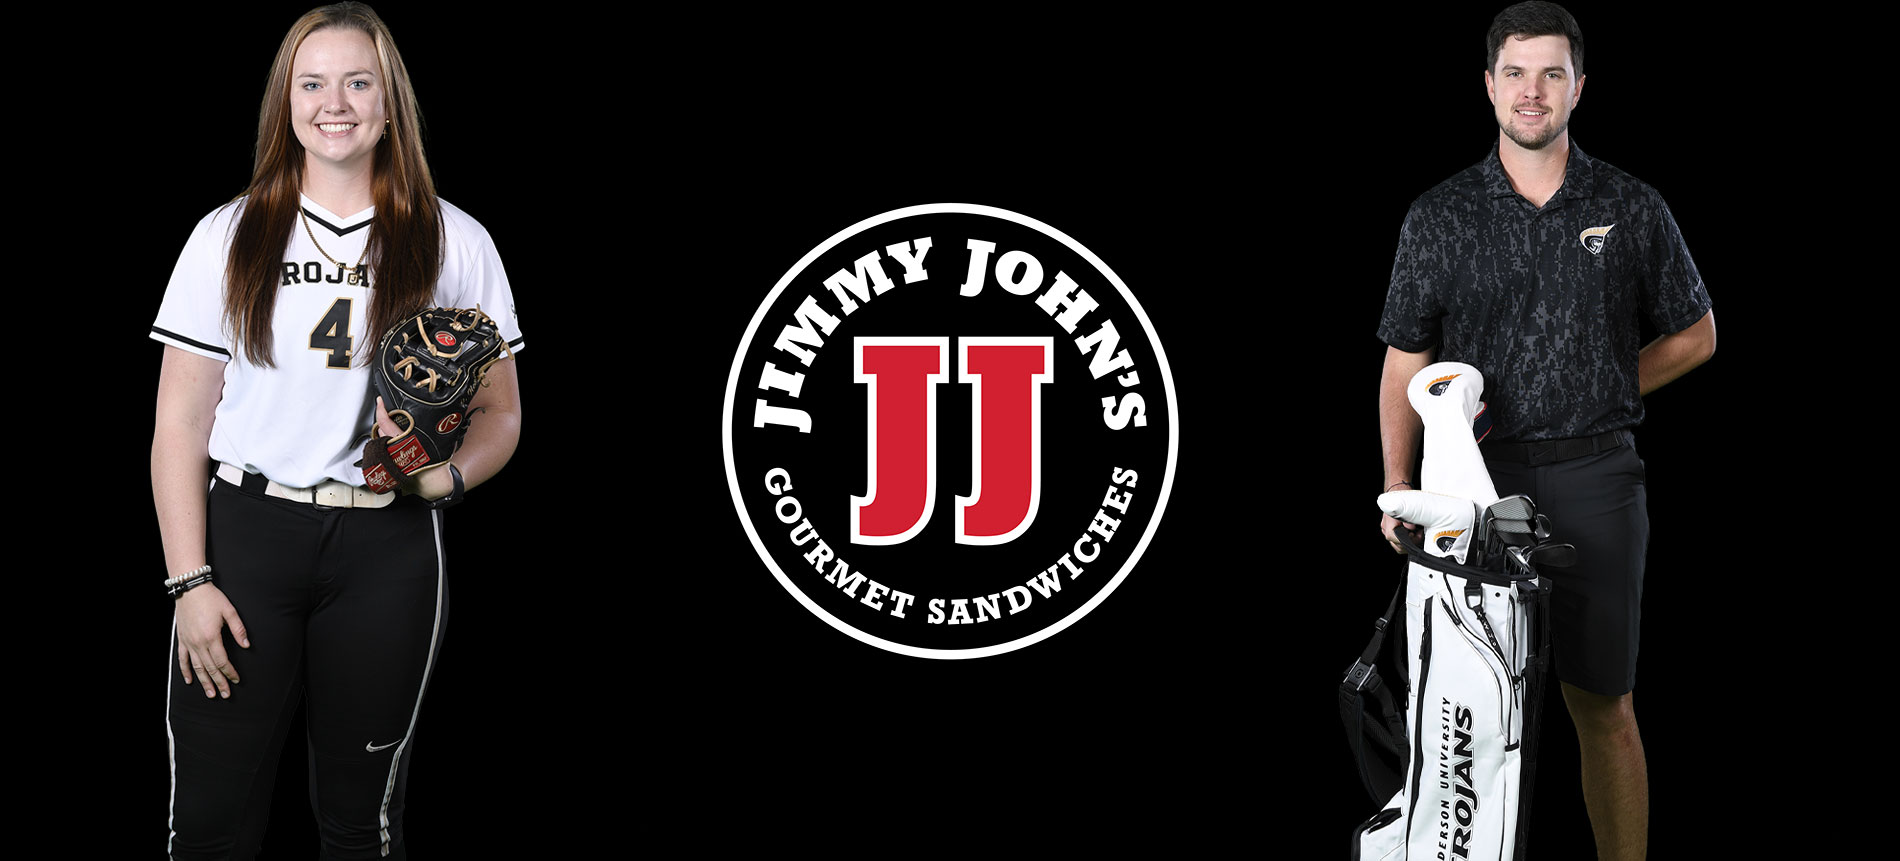 Jessica Neadow and Reece Coleman Named Jimmy John’s Female and Male Athletes of the Week for the Week